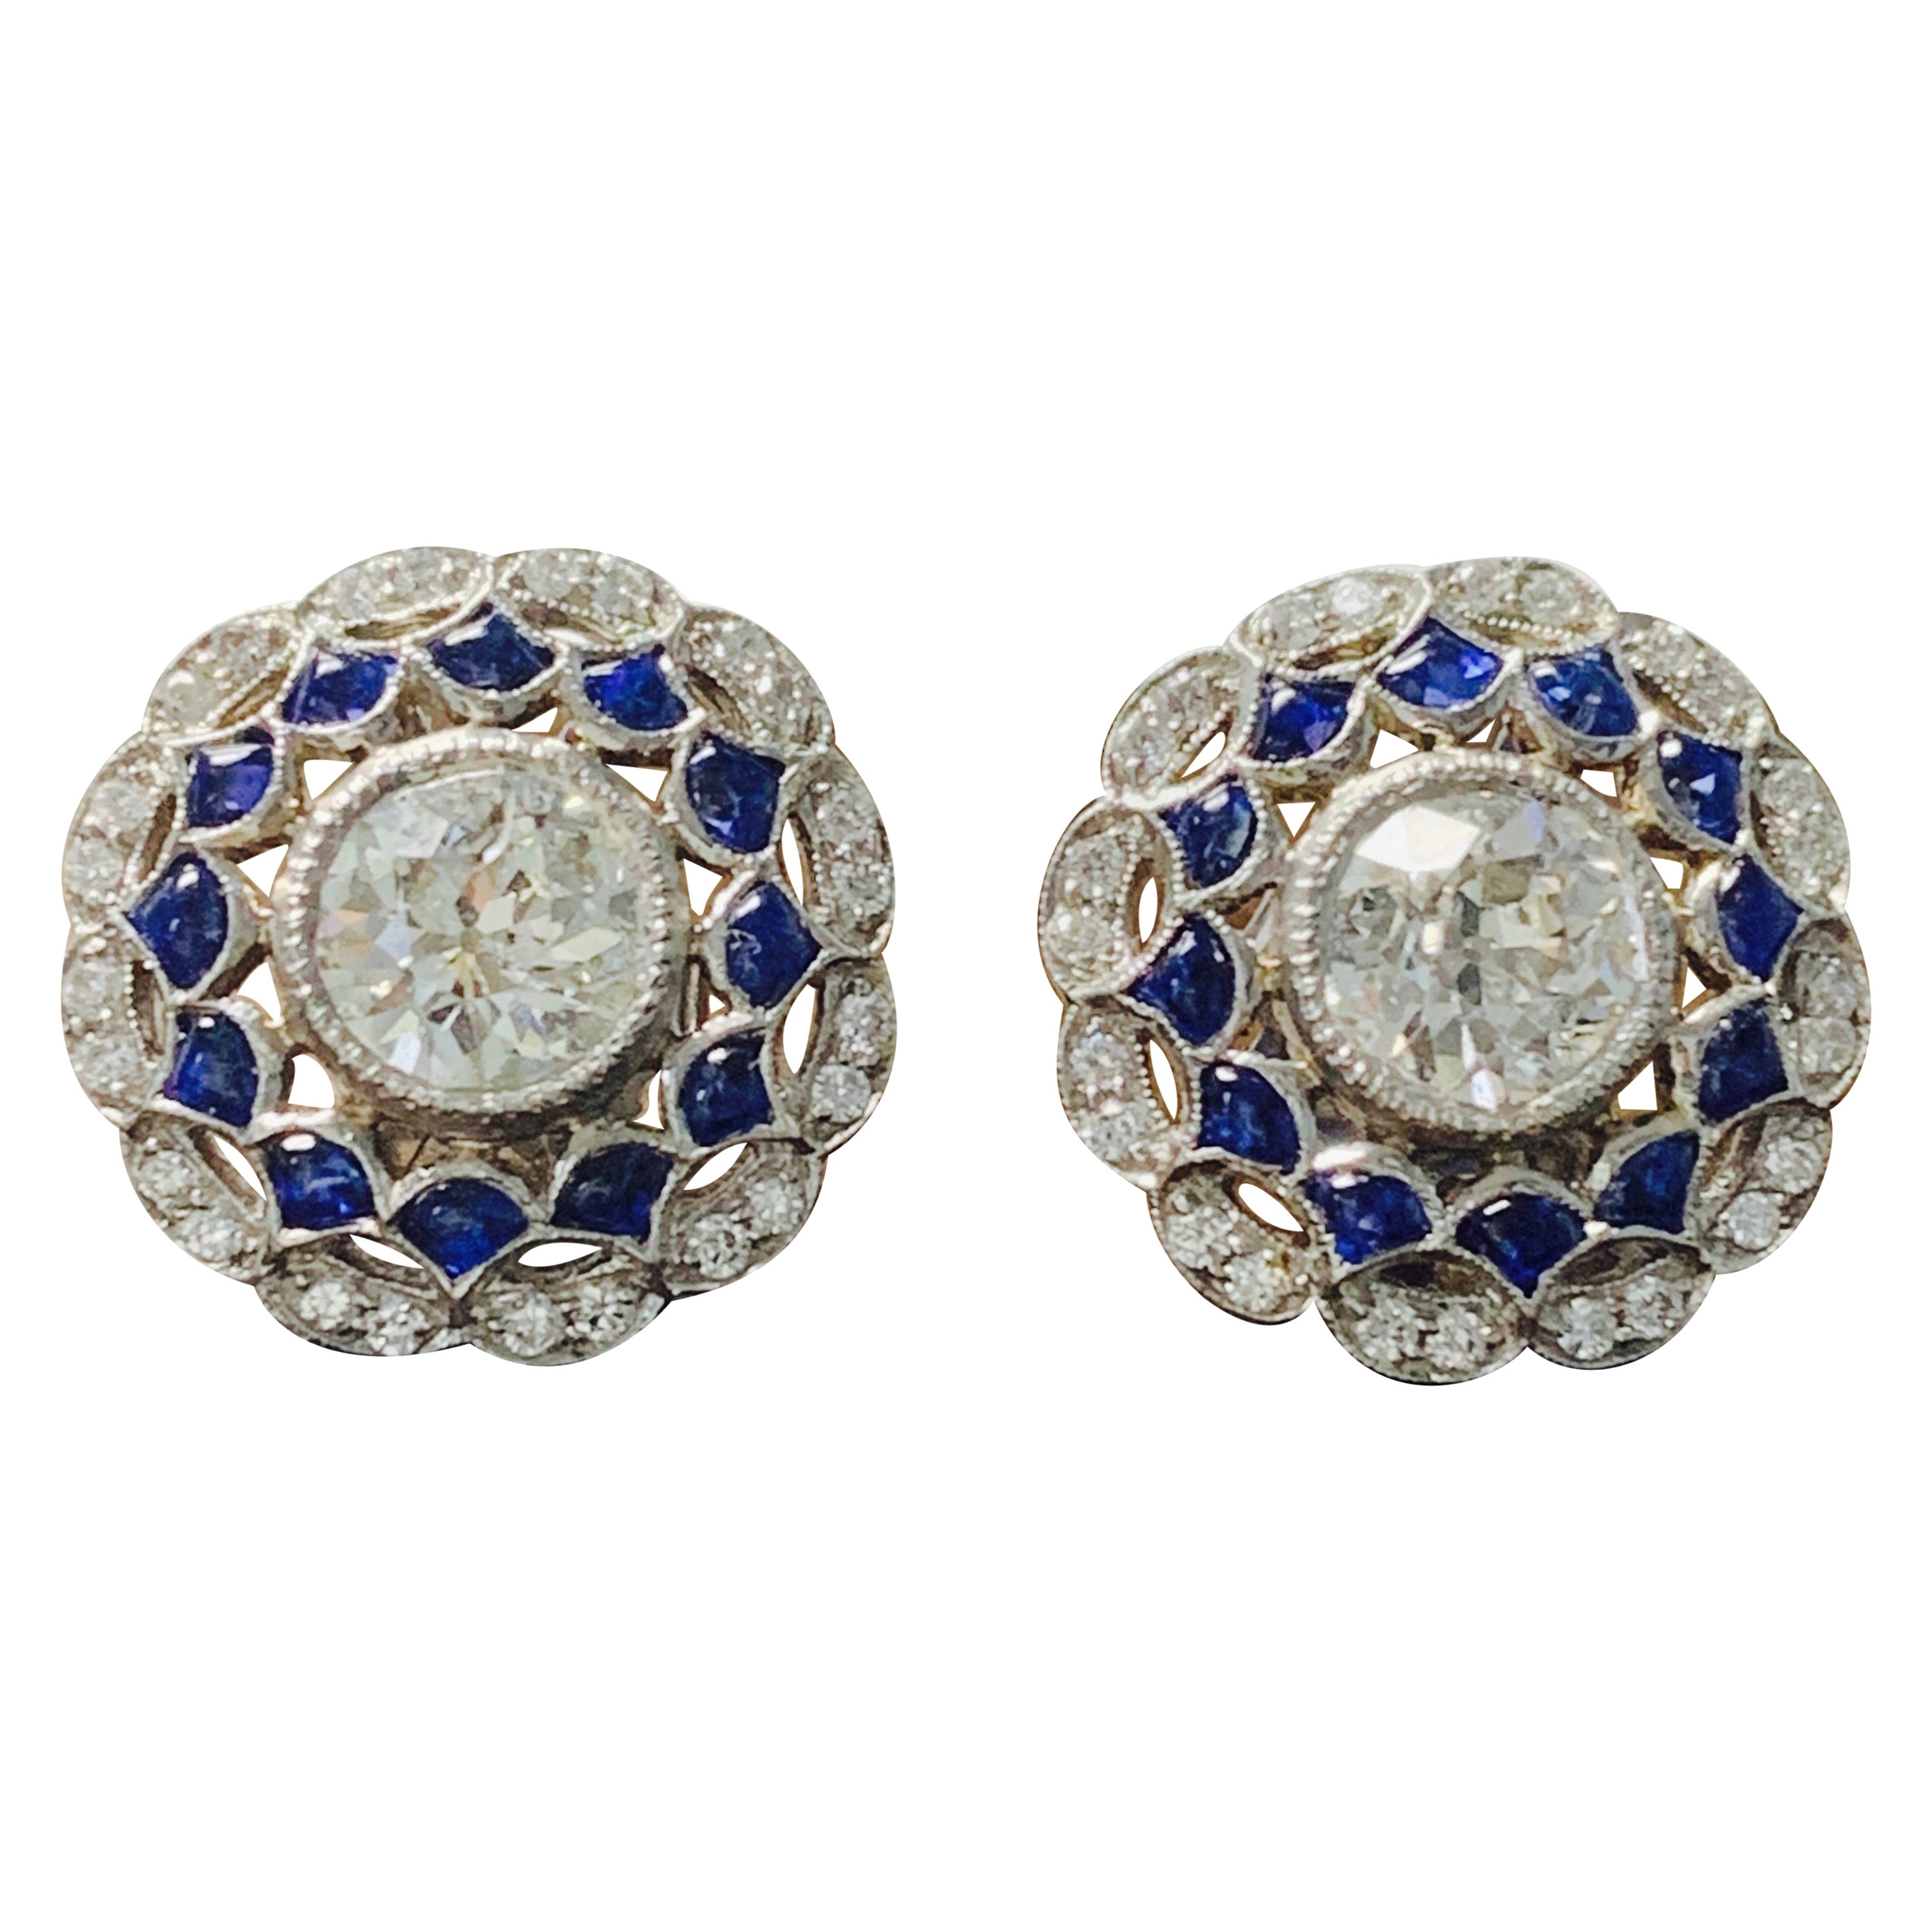 White Old European Cut Diamond and Blue Sapphire Stud Earrings in Platinum For Sale